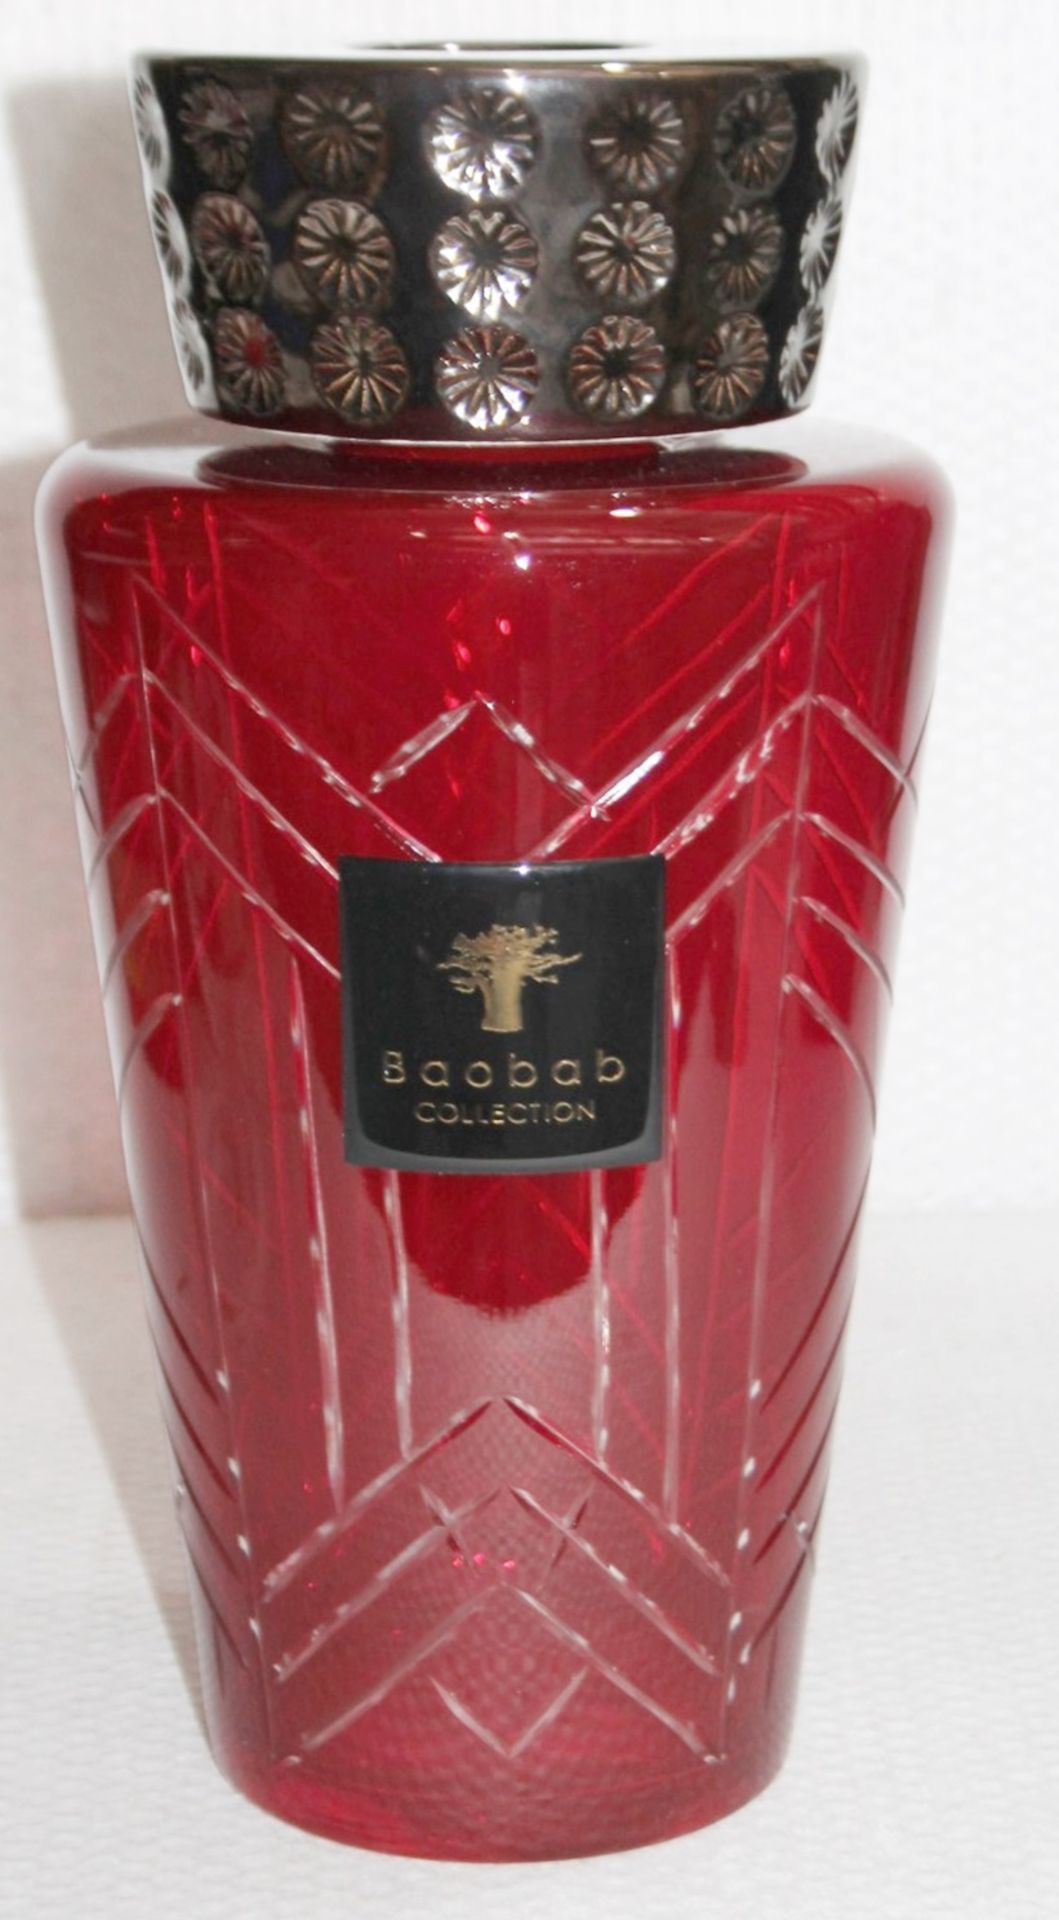 1 x BAOBAB COLLECTION 'Louise High Society' 5-Litre Totem Diffuser Vase - Original Price £745.00 - Image 2 of 7